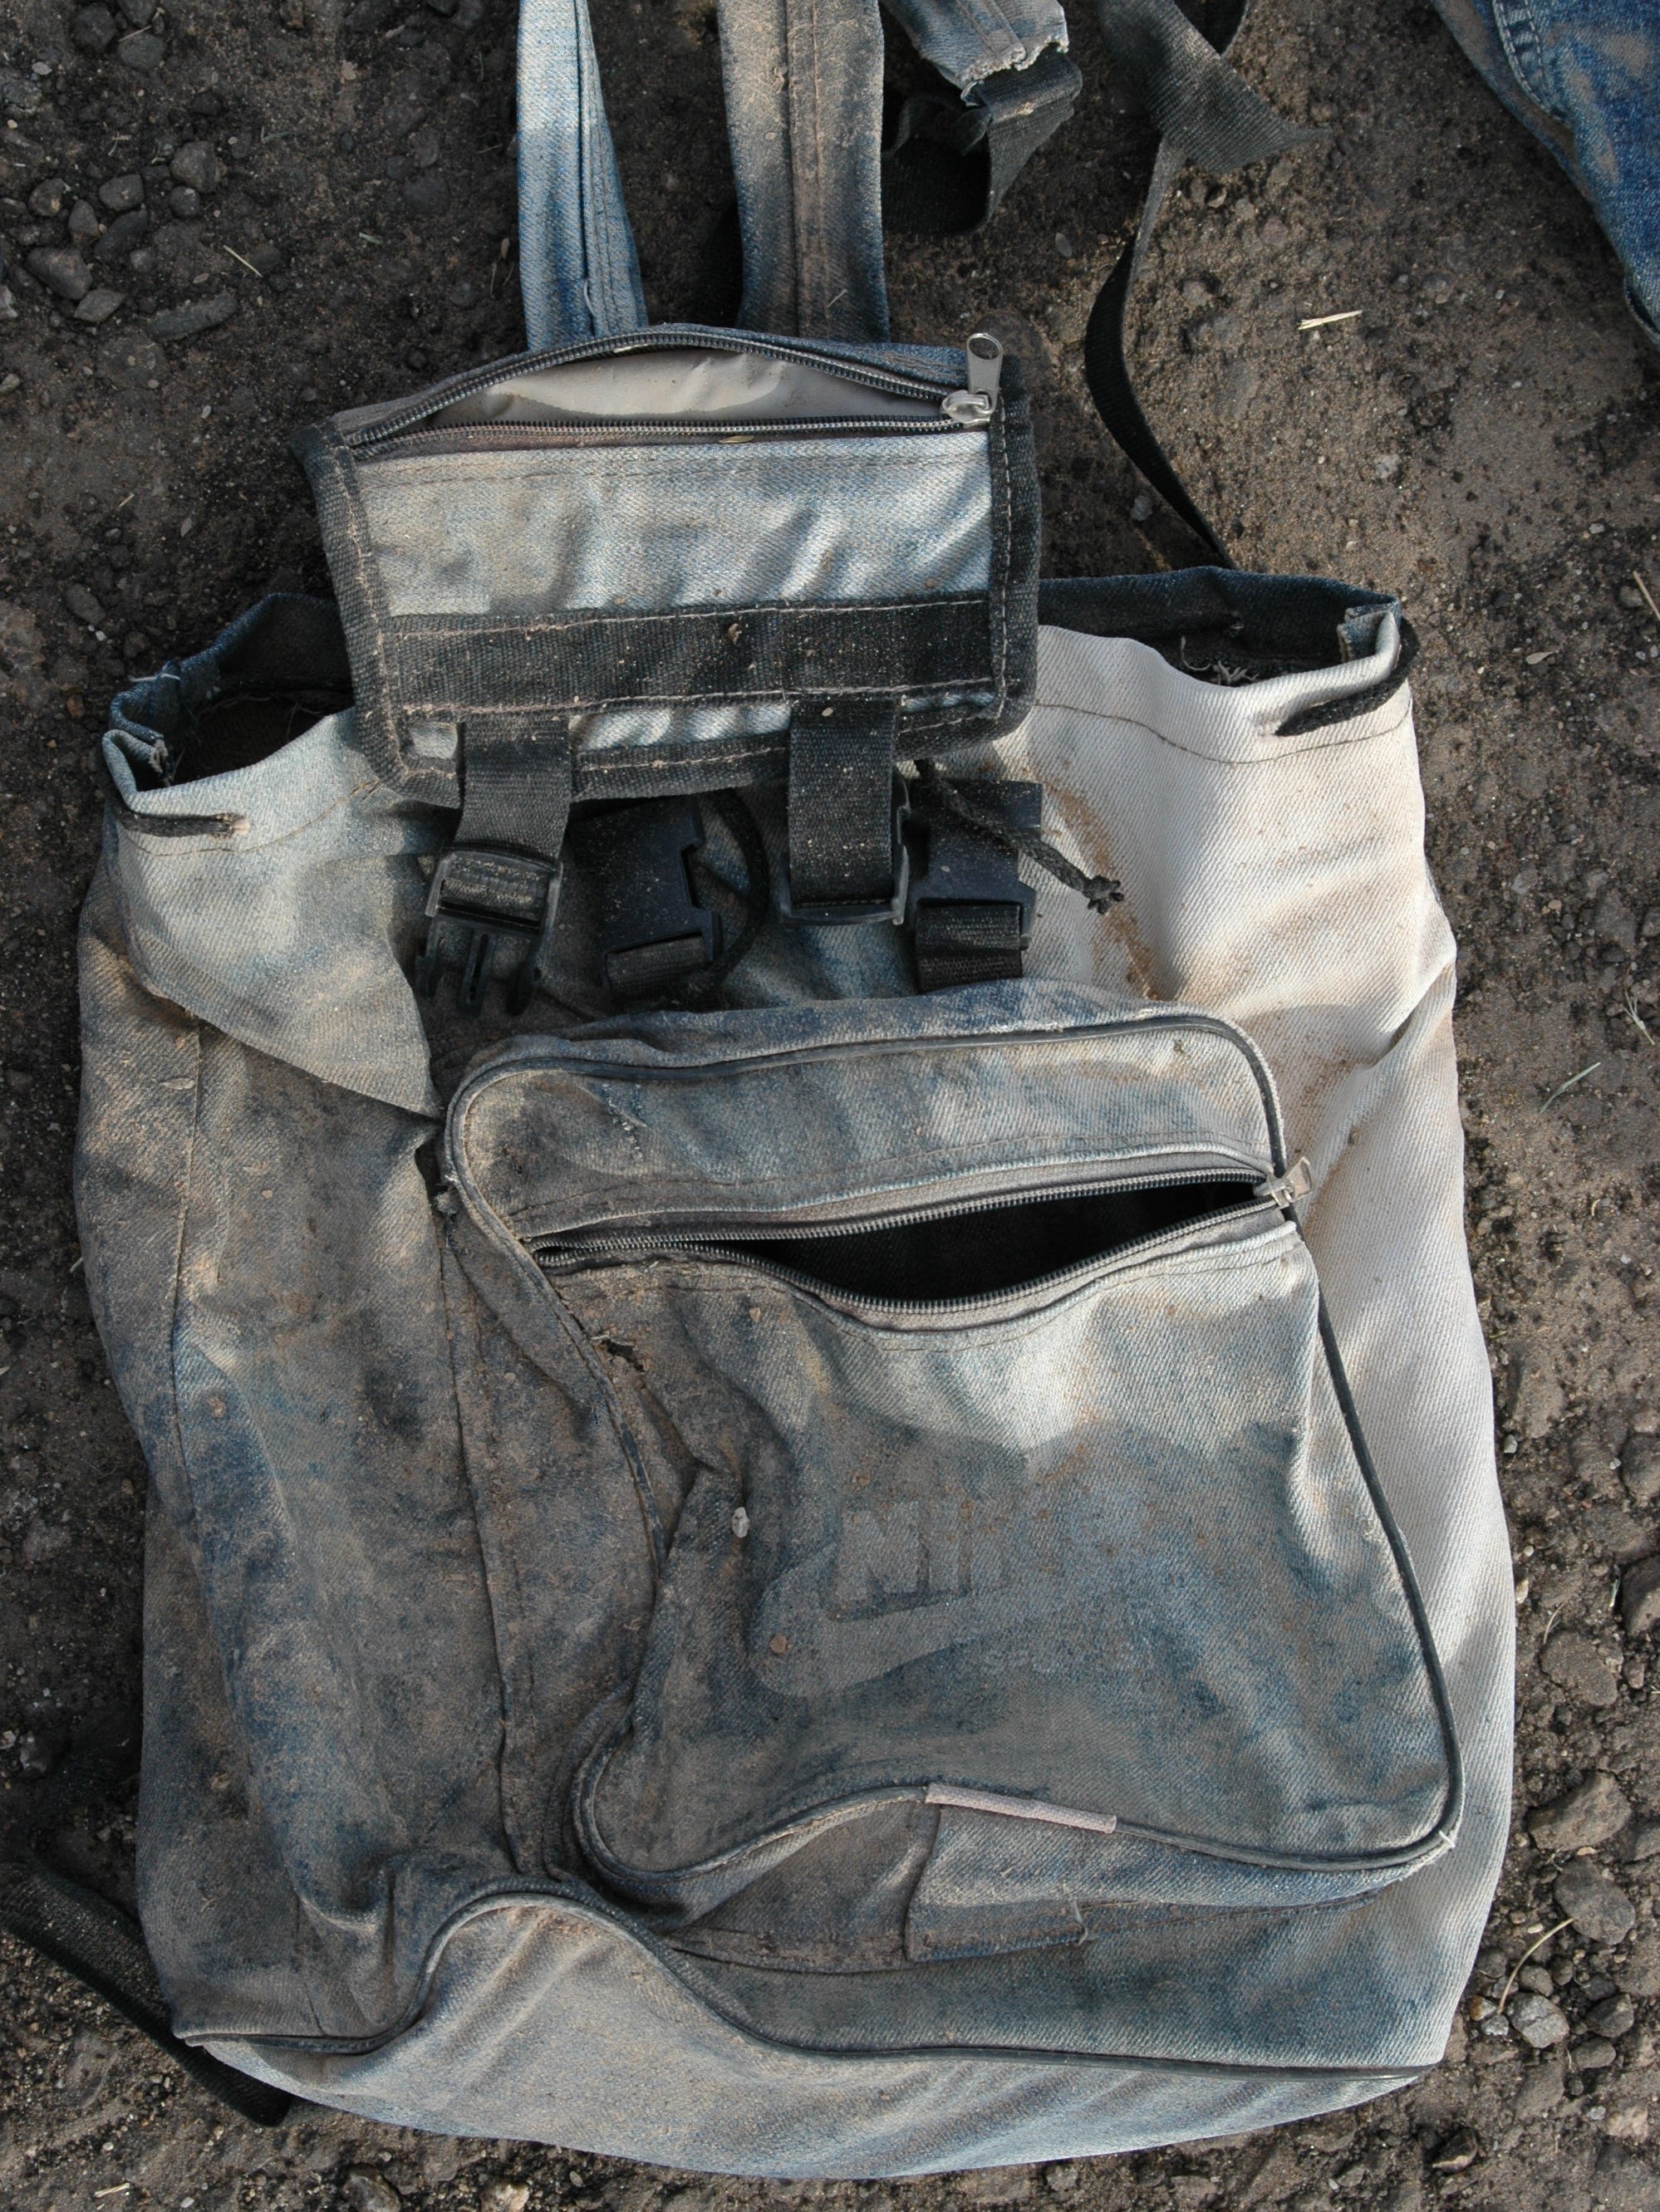 A backpack that was found with a man’s male skeleton in the open desert near Winterhaven on Dec. 17, 2005. Photo from John Doe Case #05-234.